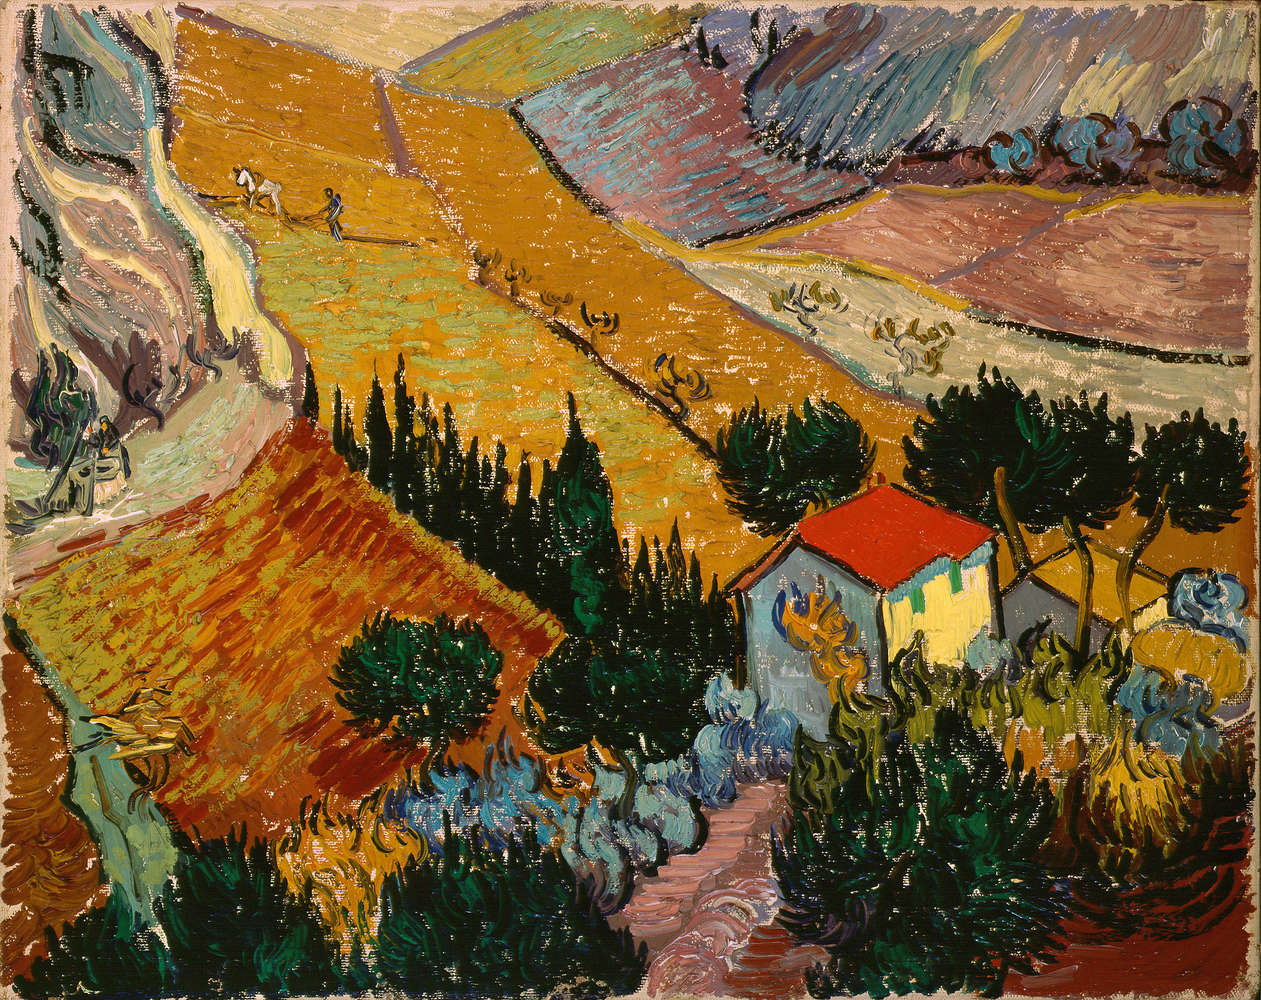             Photo wallpaper "Landscape with house and plowman" by Vincent van Gogh
        